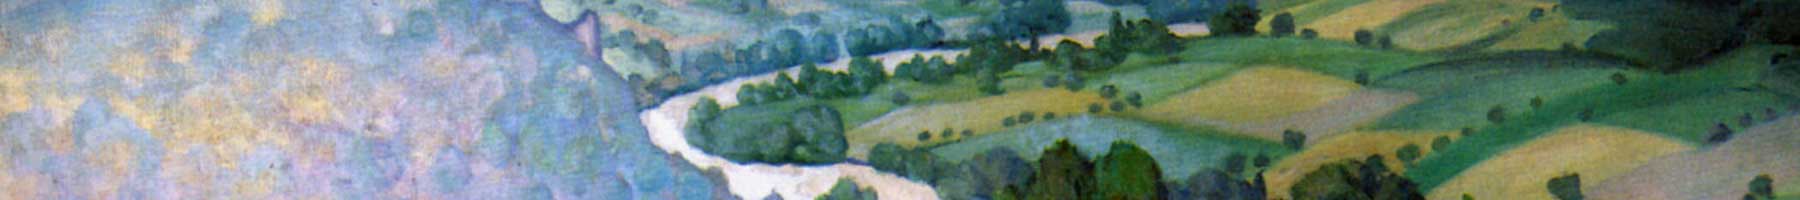 Detail from a painting by Vallatton, entitled To Remember Andelys.